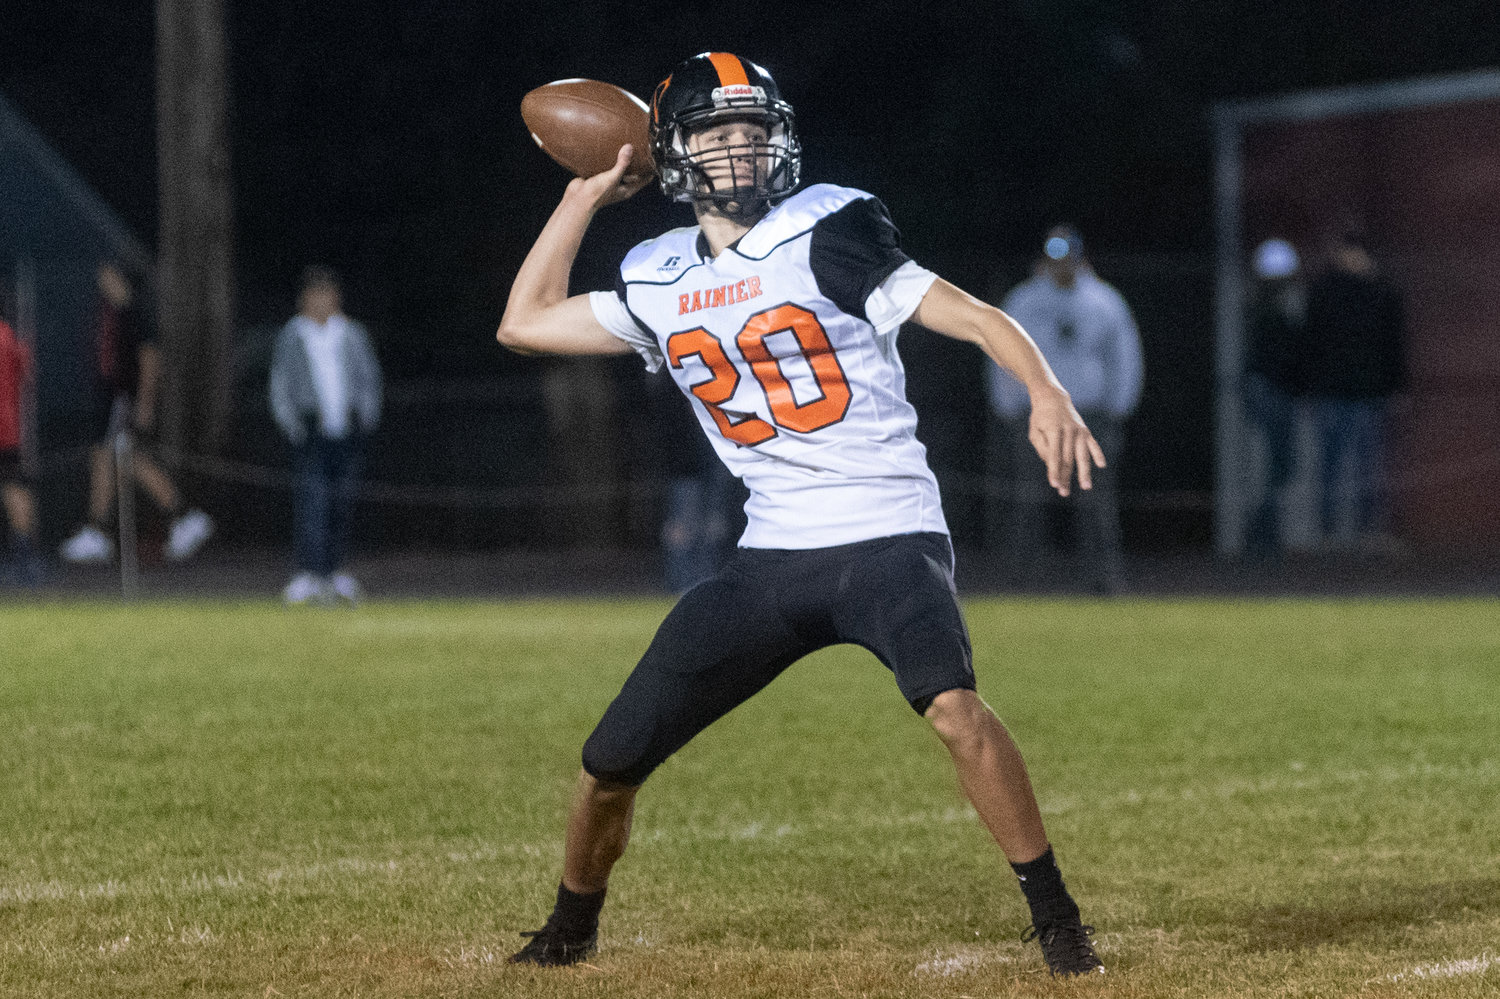 Rainier quarterback Ian Sprouffske attempts a pass in the Mountaineers loss to Napavine Saturday night.